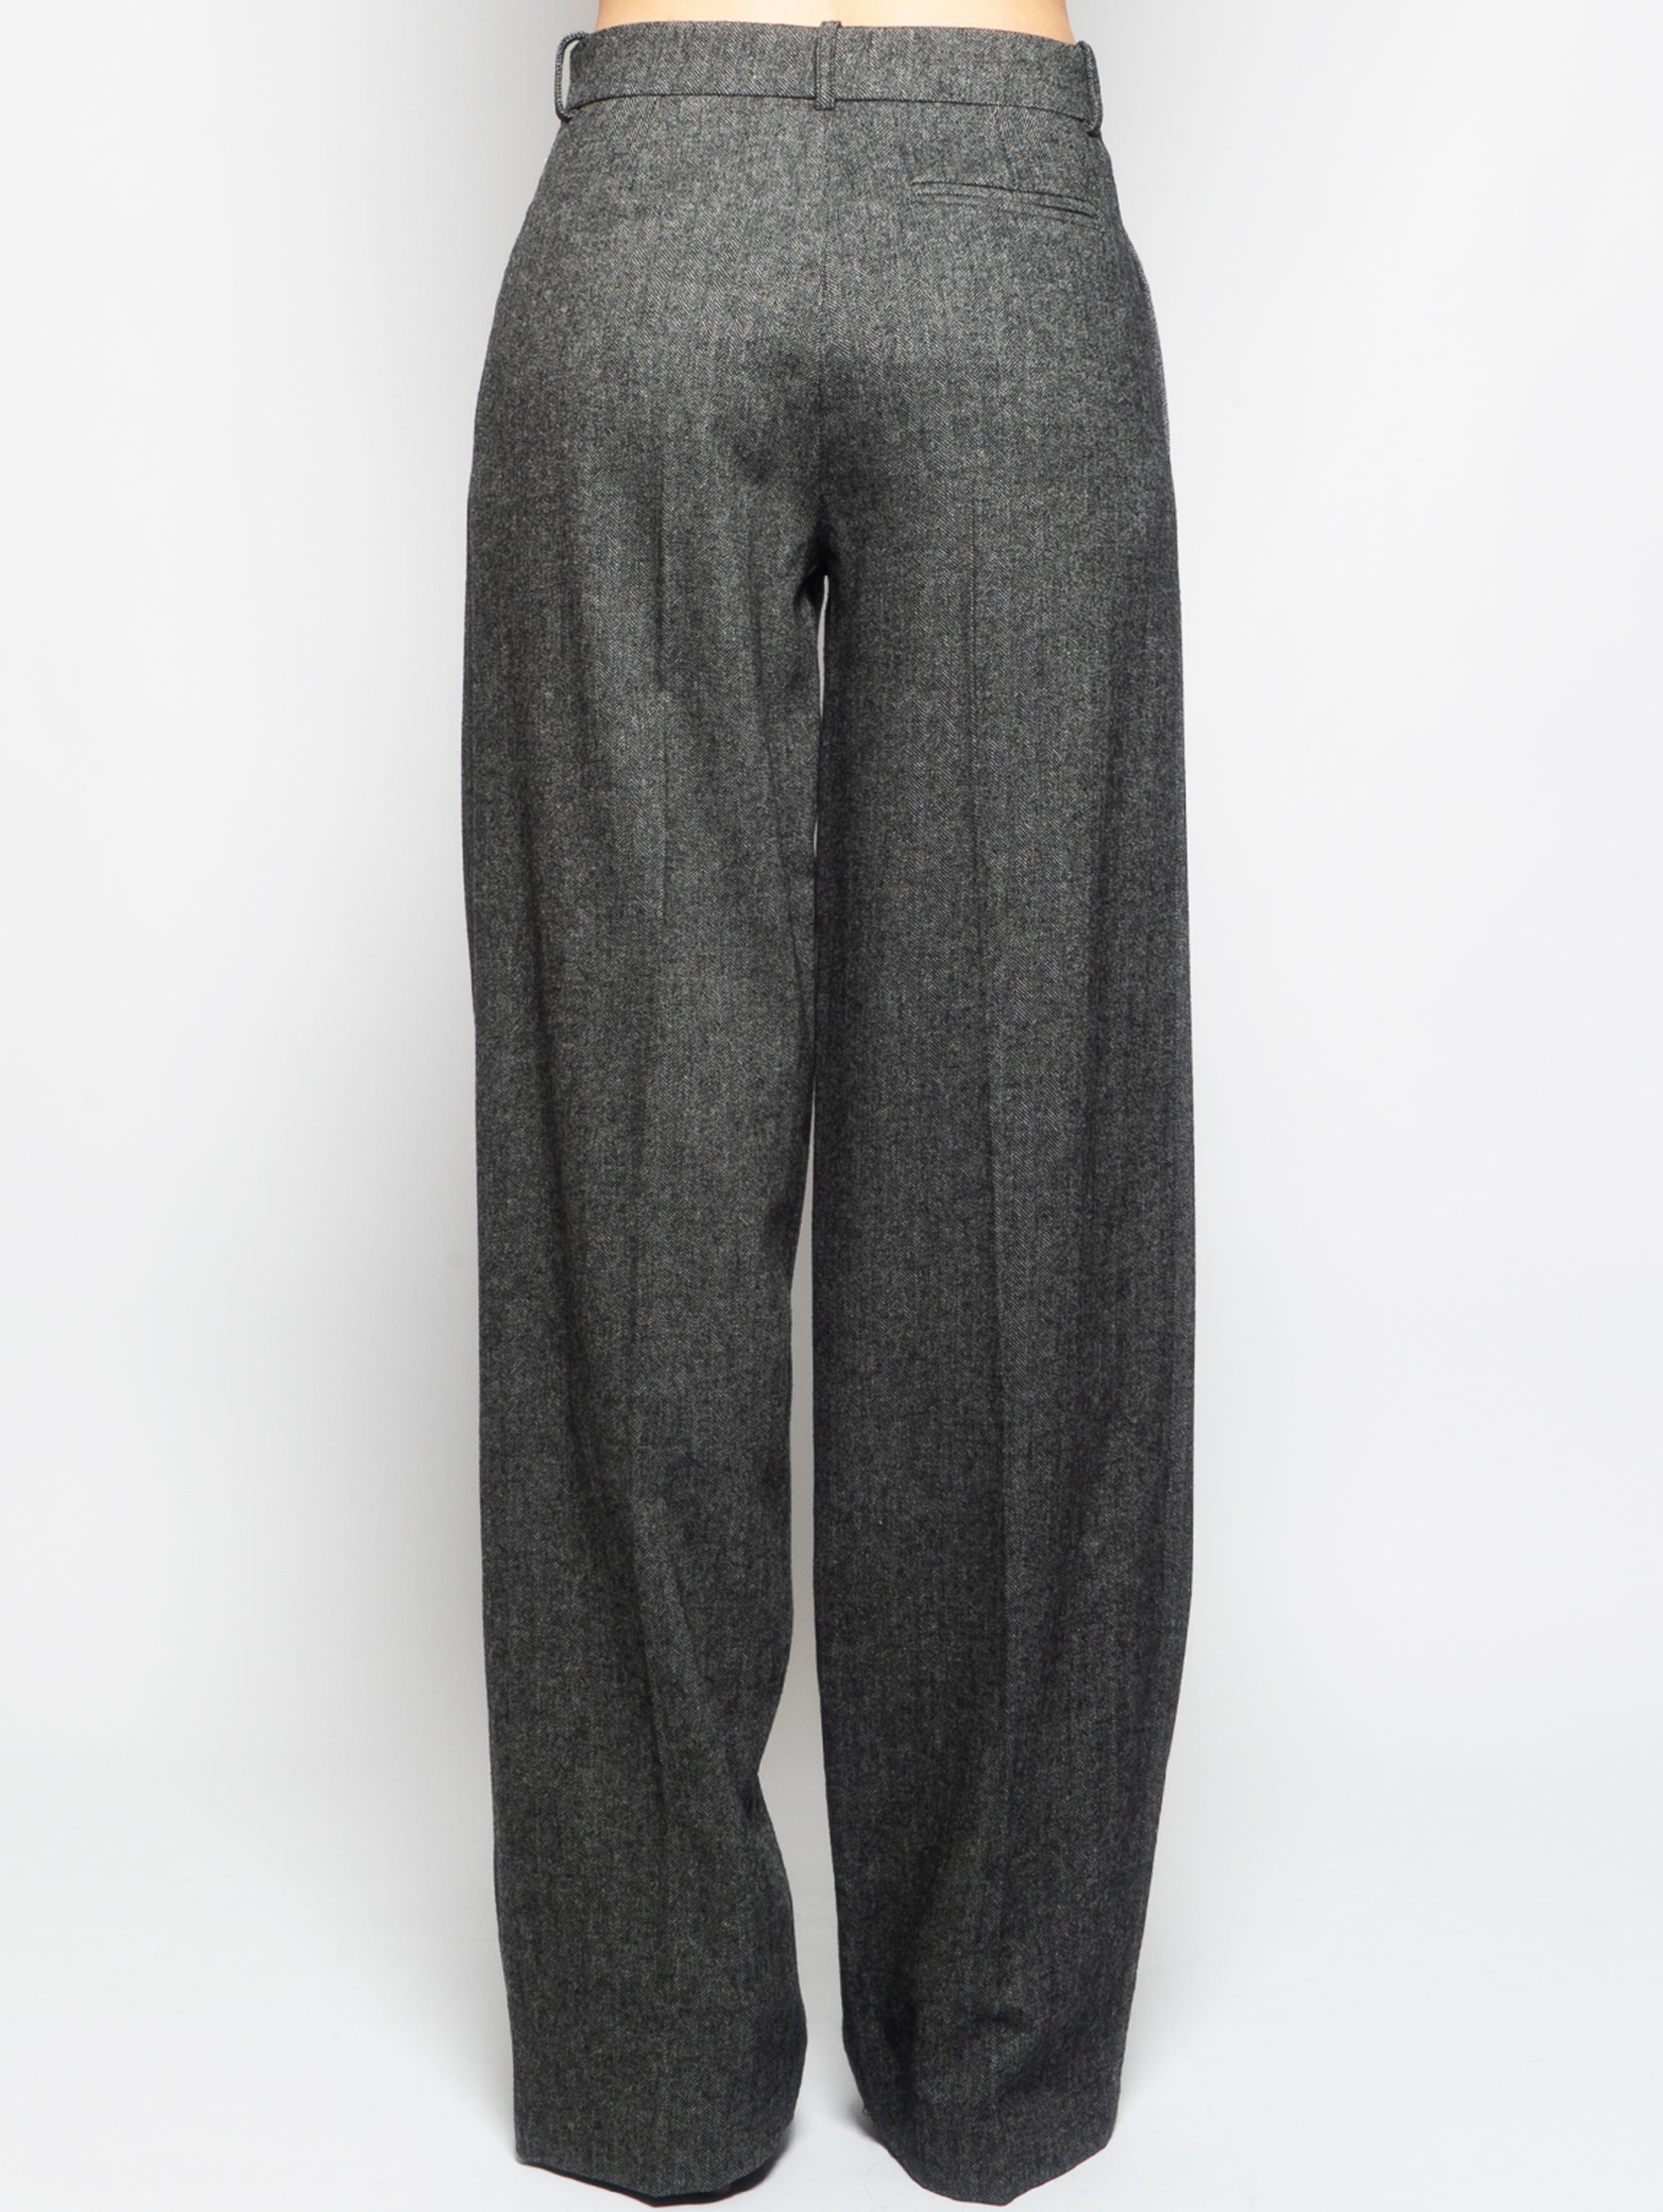 Palazzo Trousers in Gray Tweed